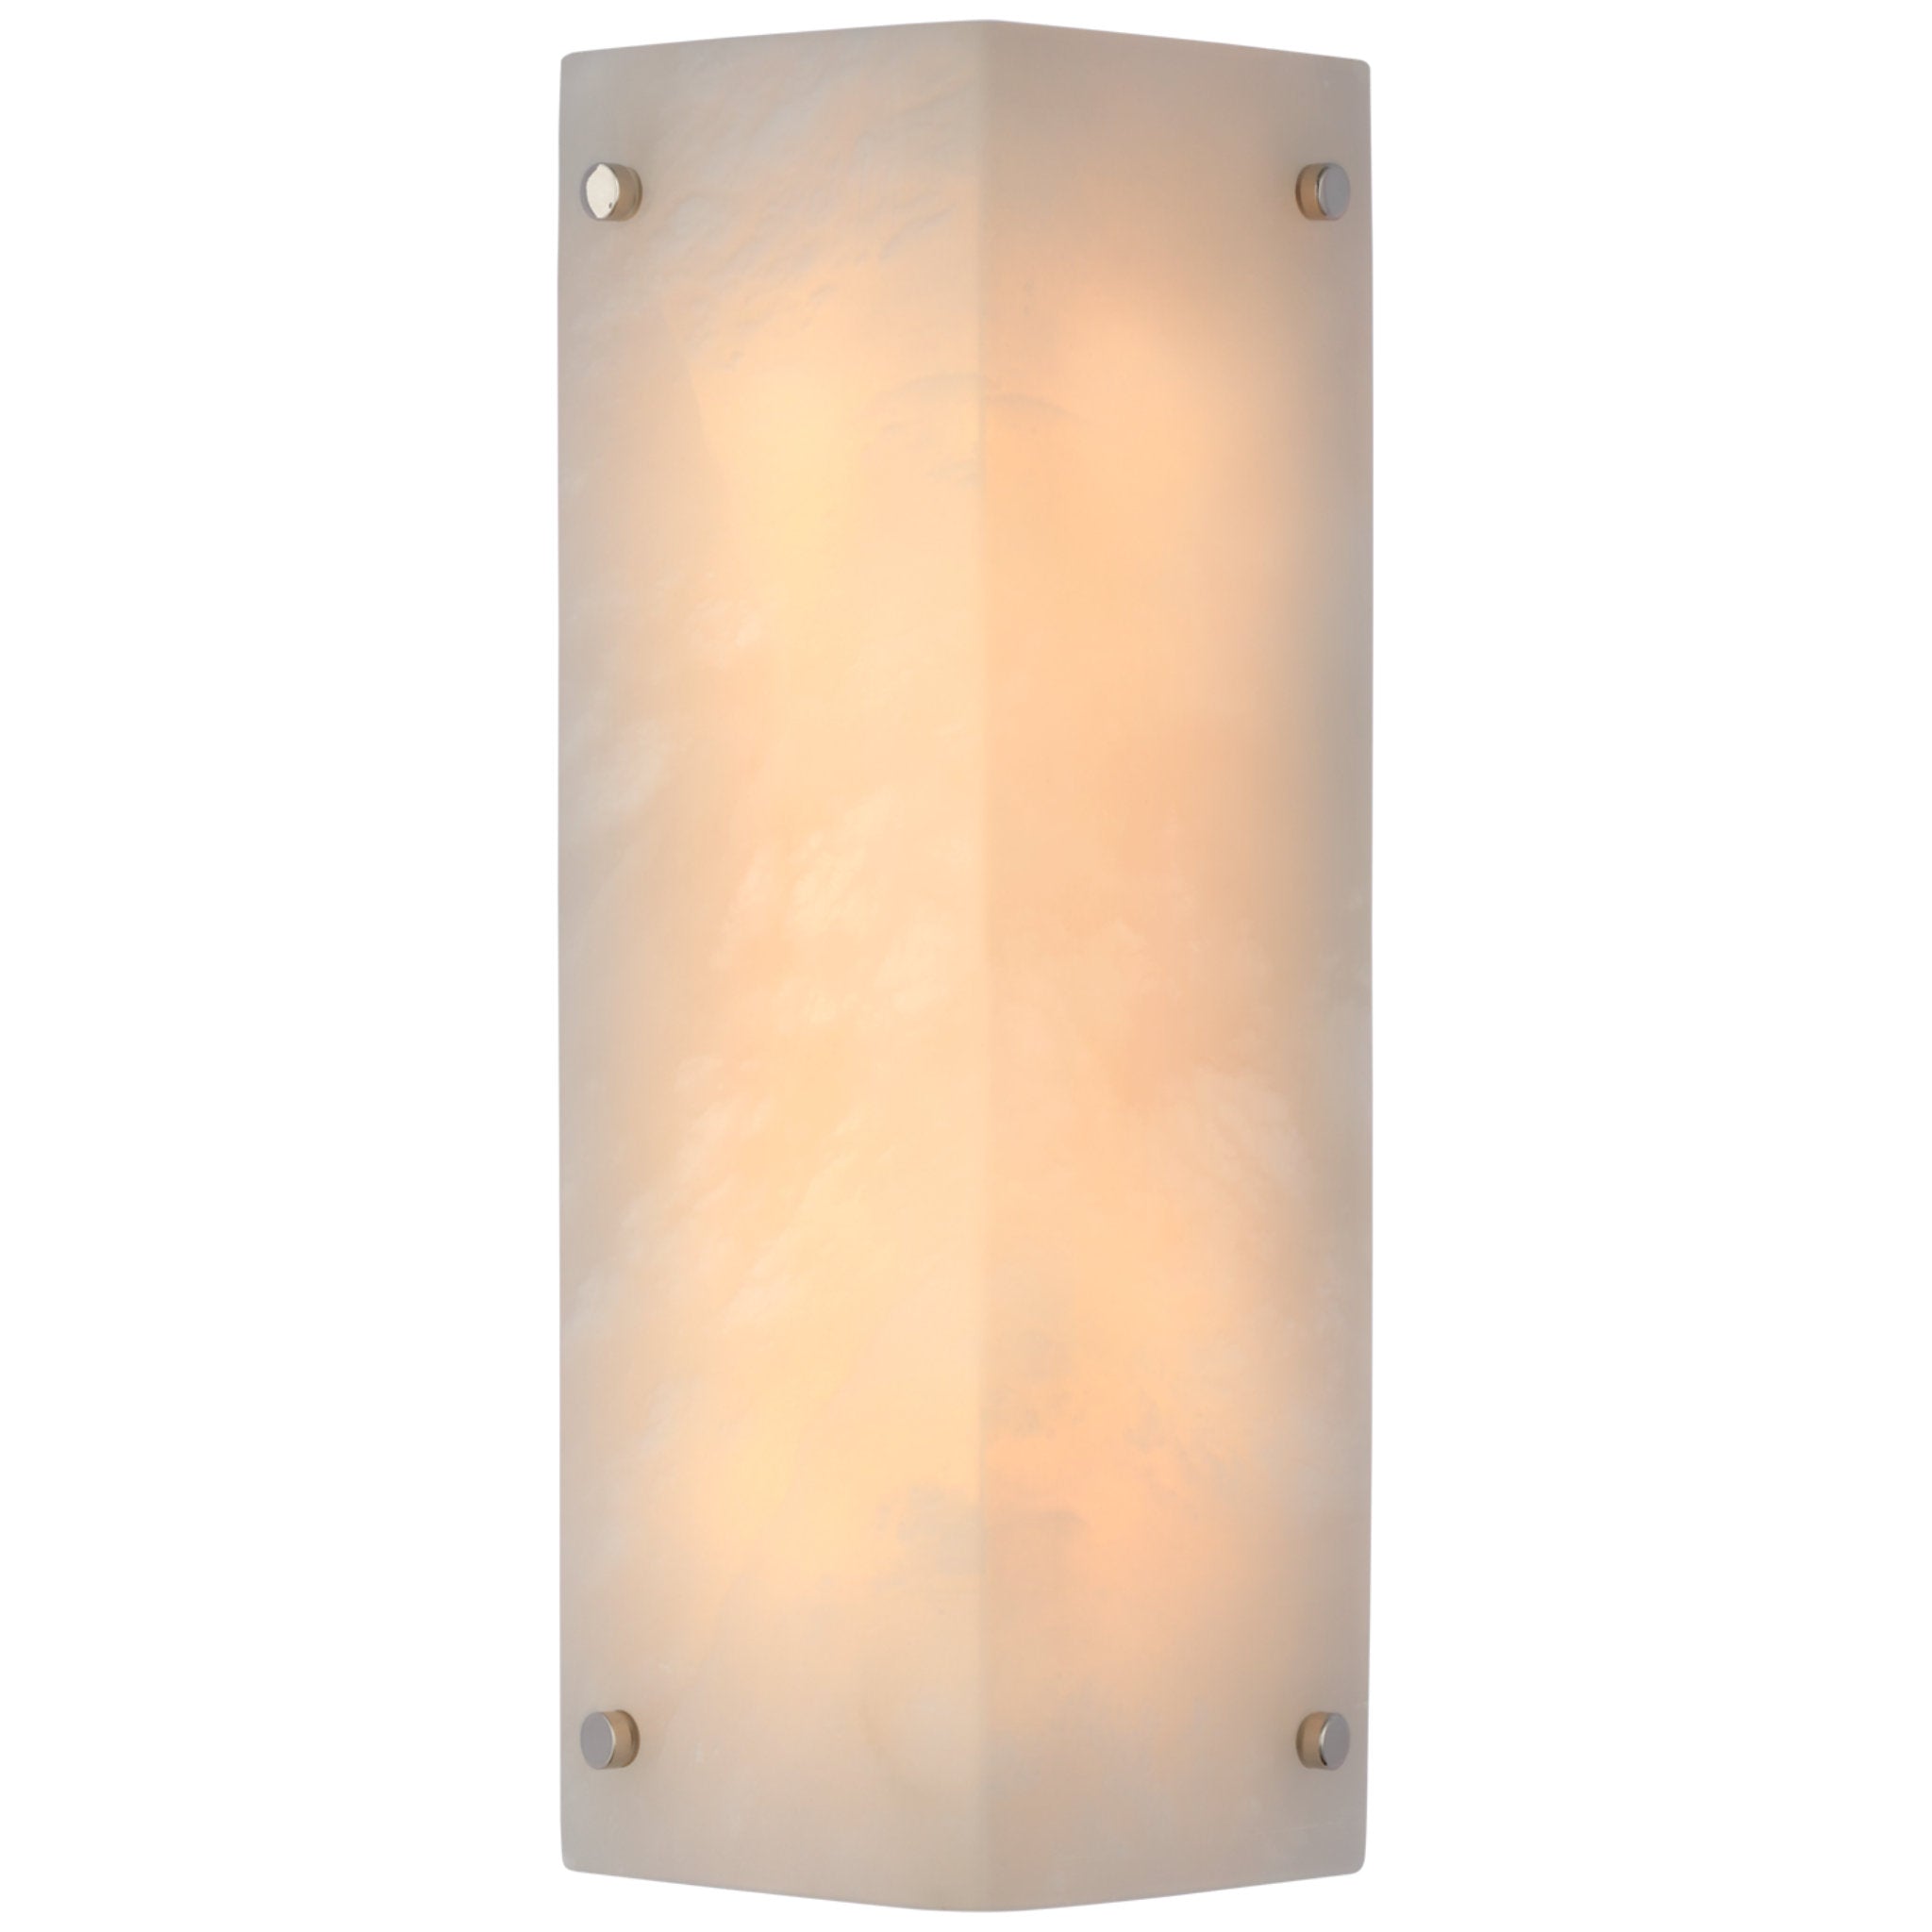 AERIN Clayton Wall Sconce in Alabaster and Polished Nickel